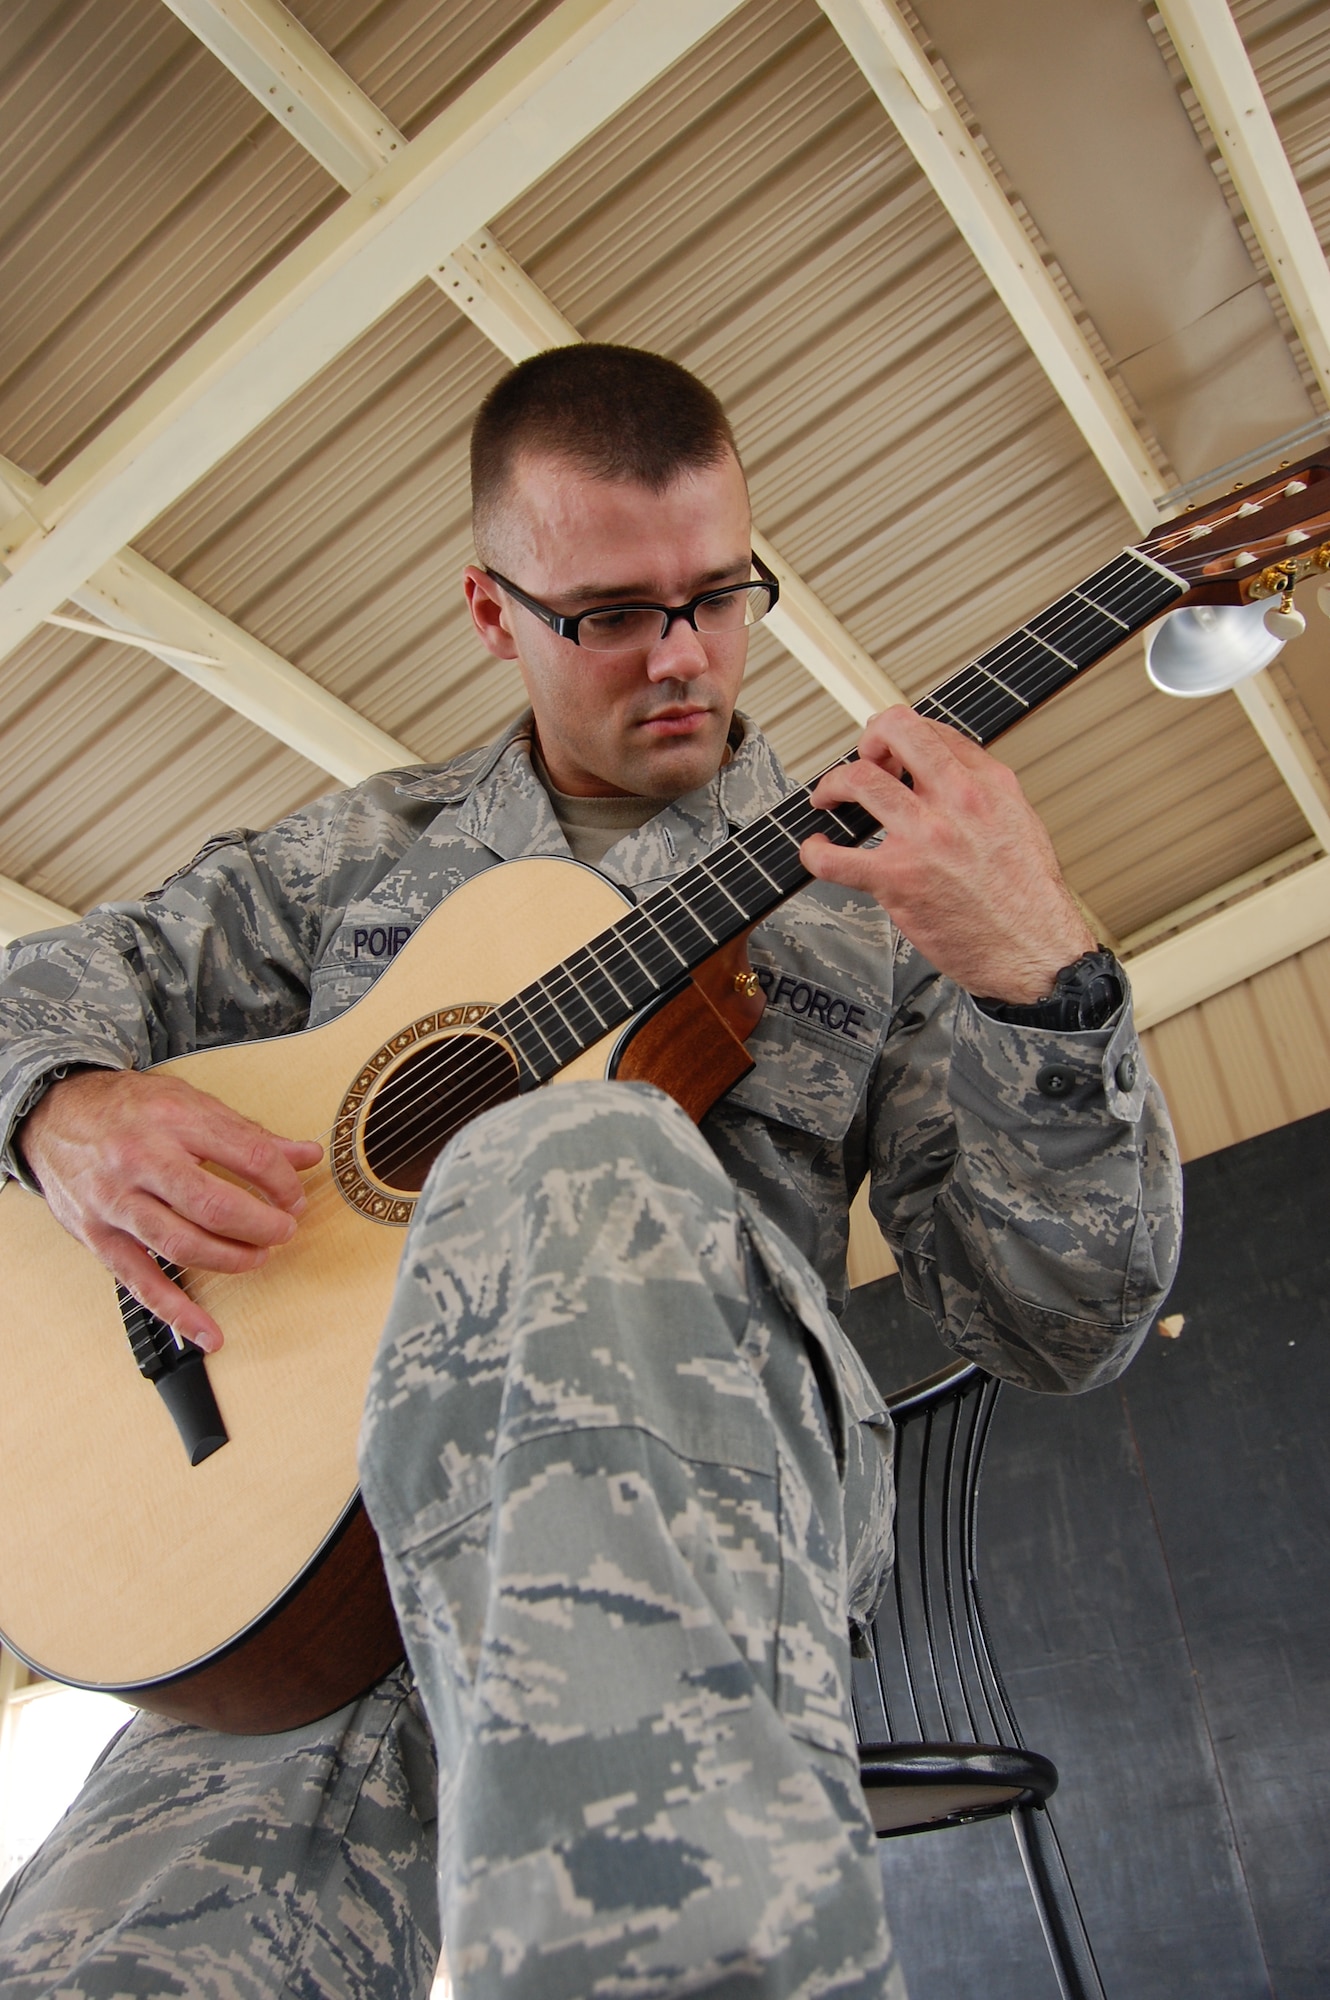 U.S. Air Force Staff Sgt. Israel Poire, 386th Expeditionary Civil Engineer Squadron structural journeyman, practices his guitar May 28, 2010 at an air base in Southwest Asia. The fingerstyle guitarist is a Mustang, Okla. native deployed from the 137th Civil Engineer Squadron at Will Rogers Air National Guard Base, Okla. (U.S. Air Force photo by Staff Sgt. Lakisha Croley/Released)